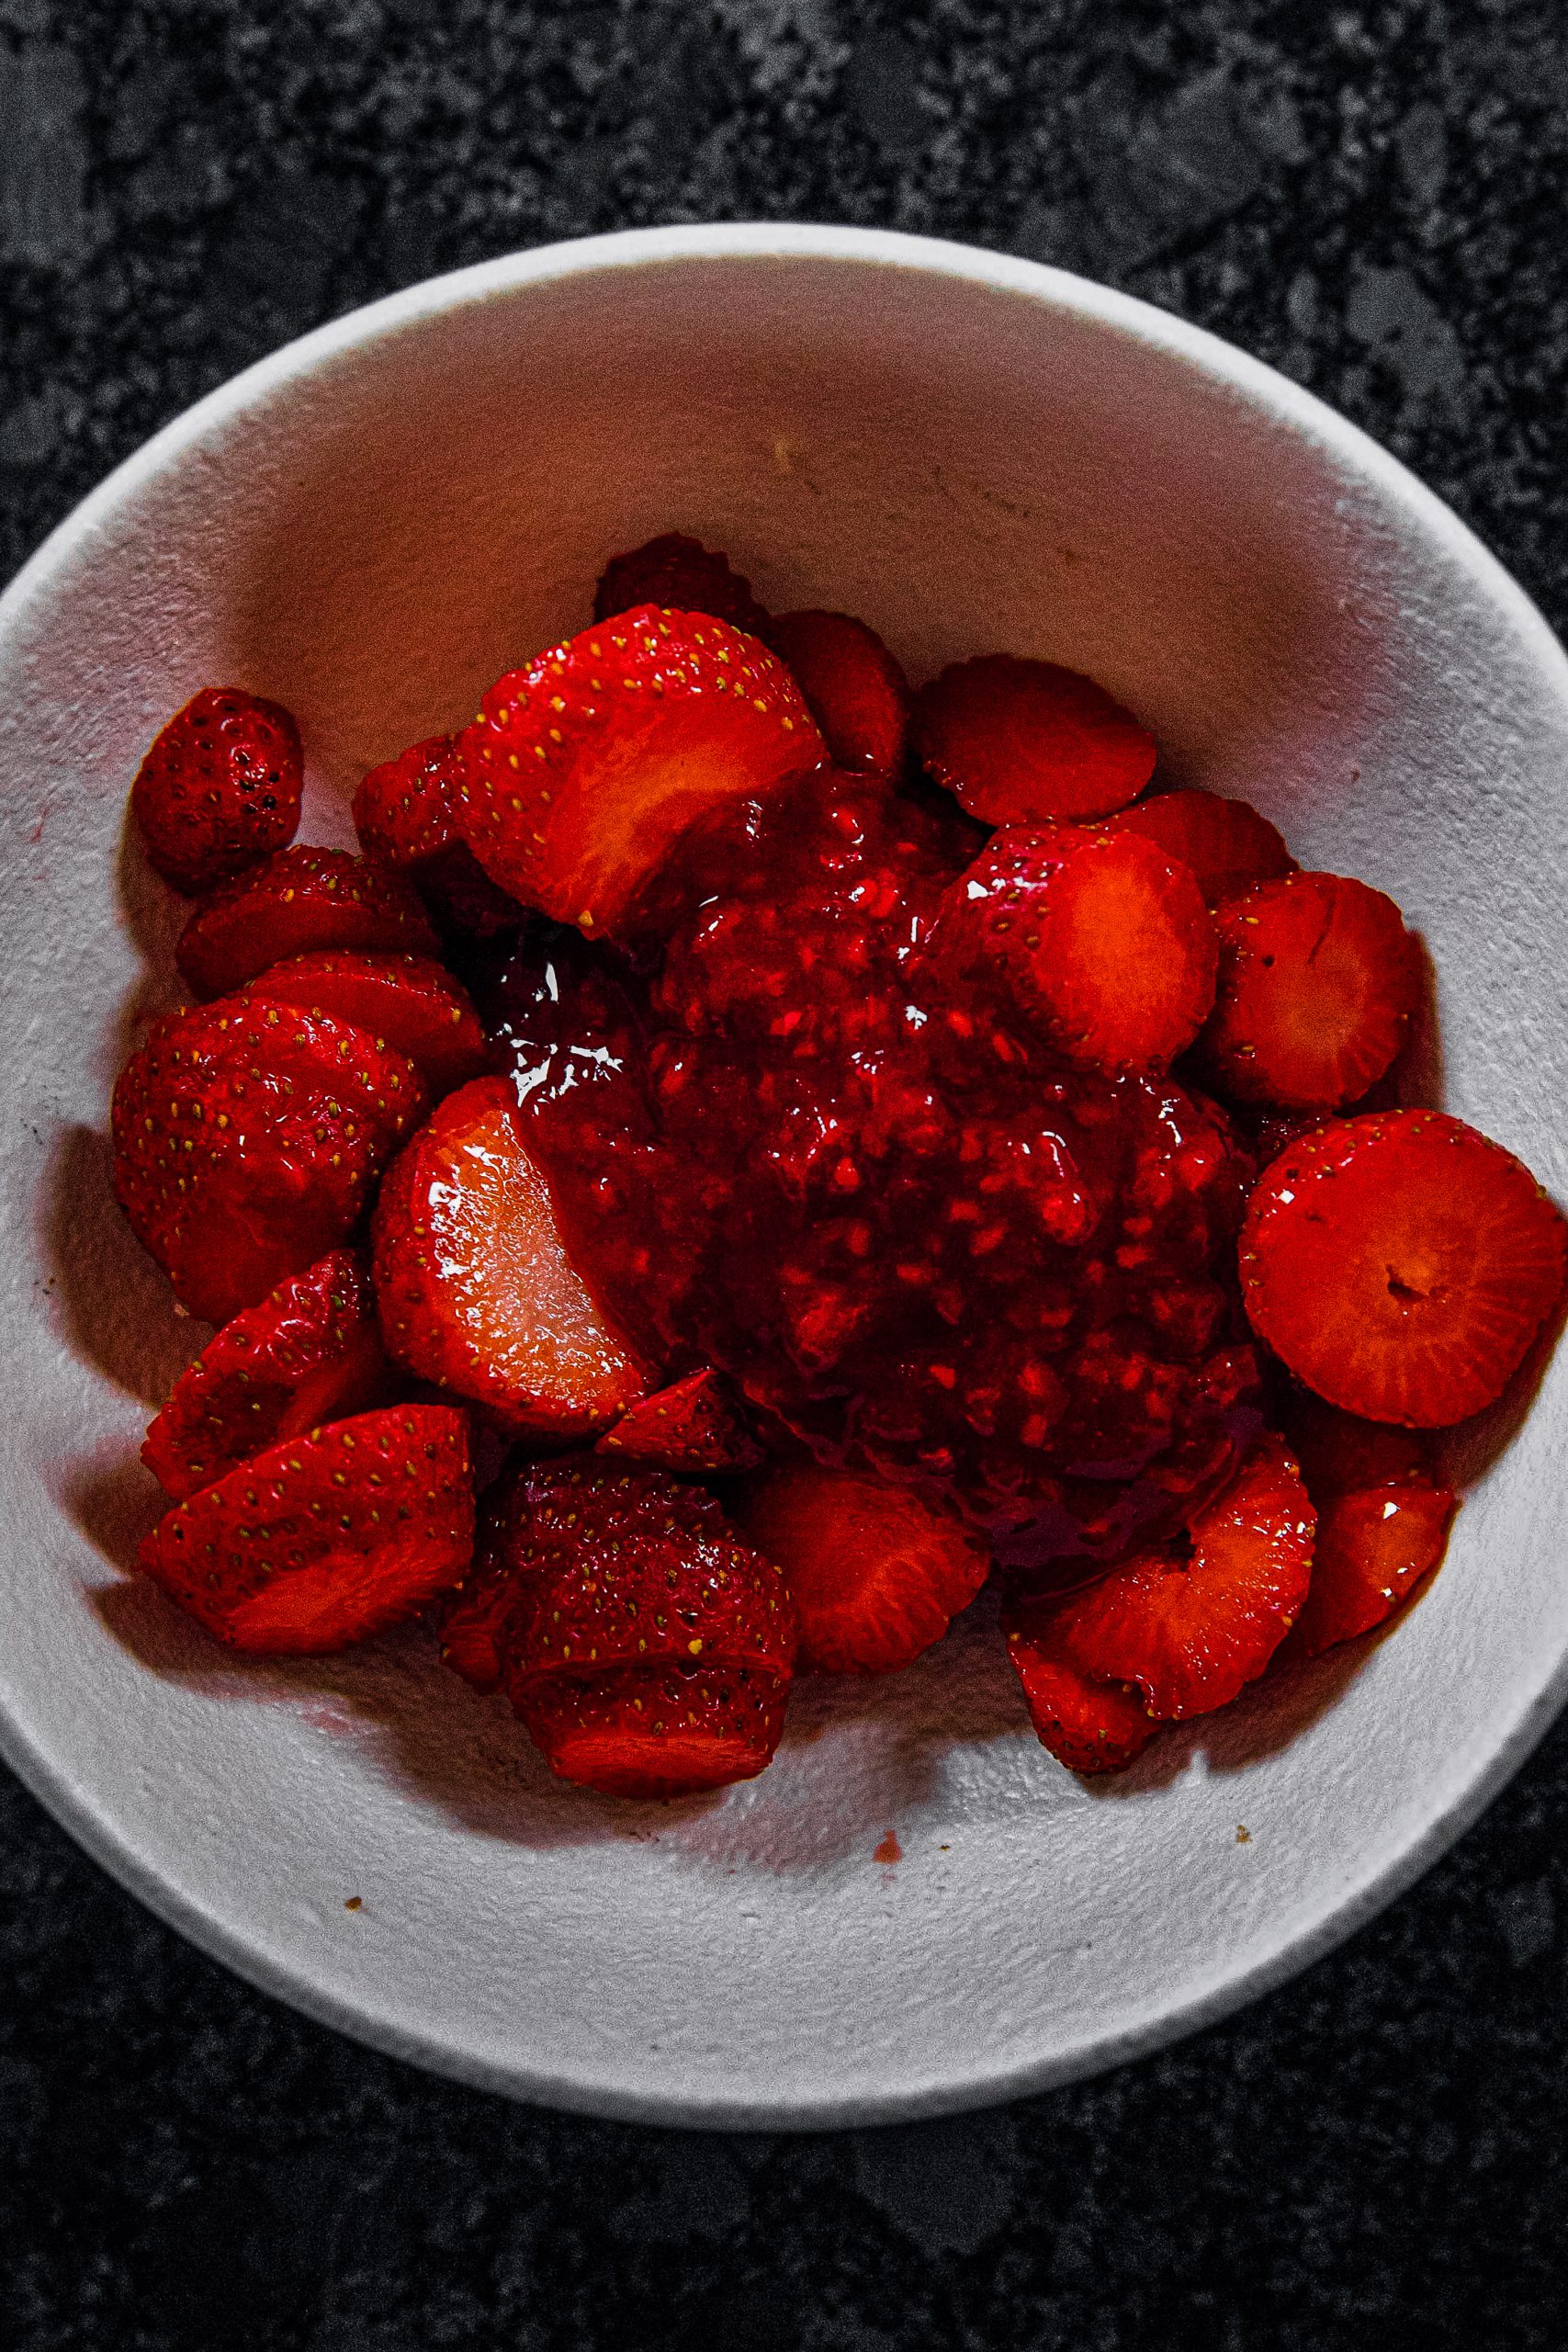 In a separate mixing bowl, add the glaze and strawberries